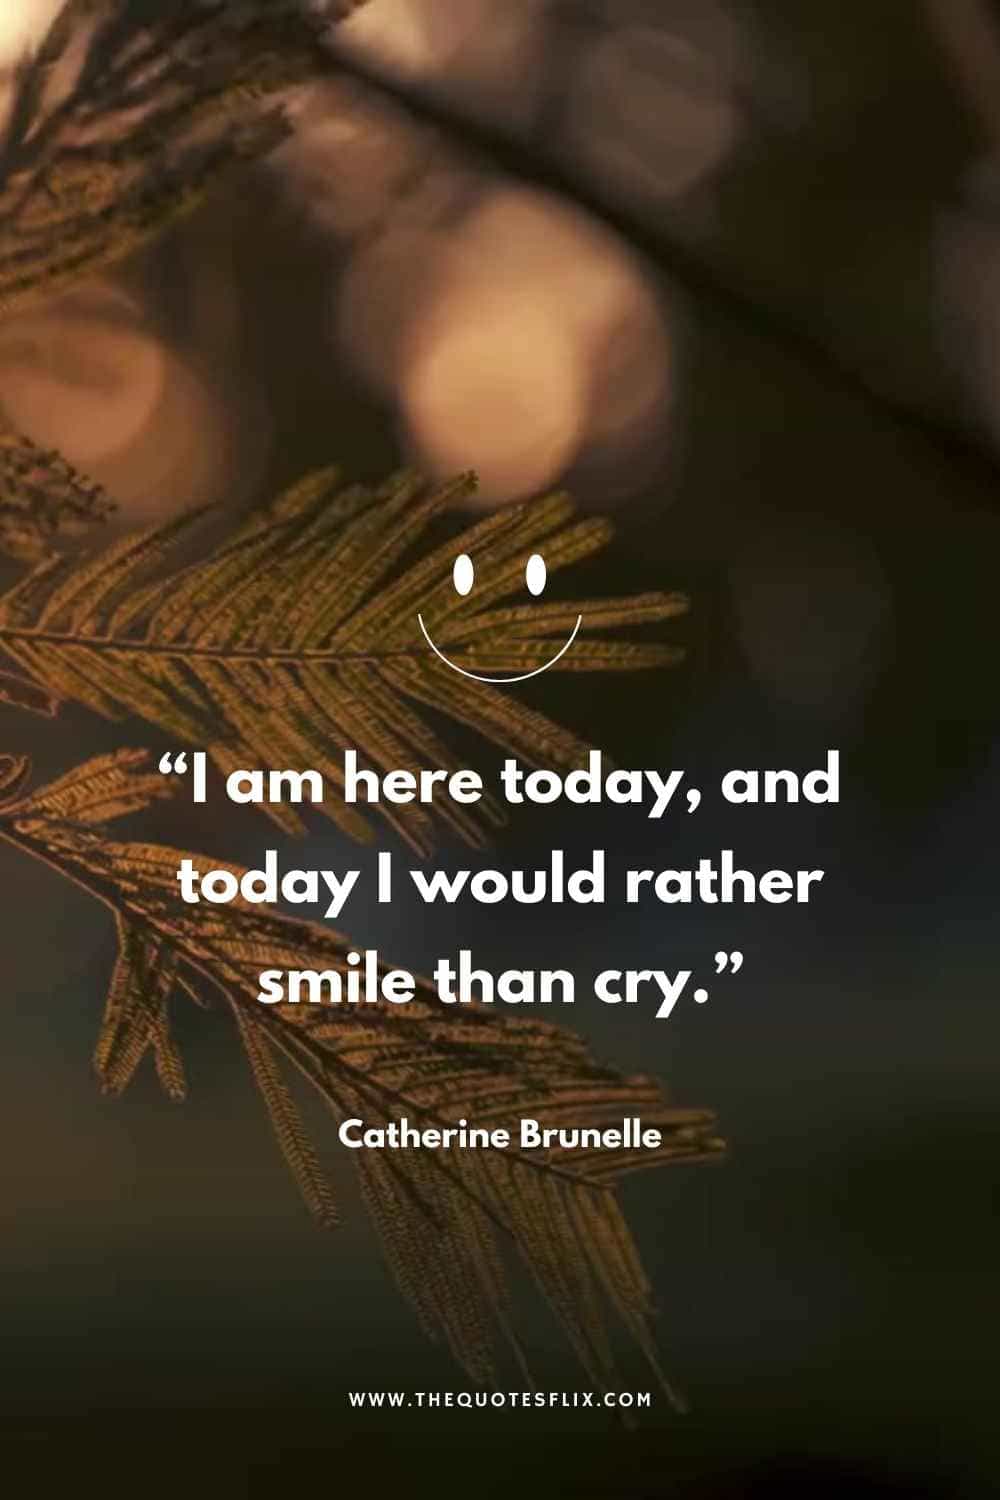 cervical cancer quotes - here today i rather smile than cry